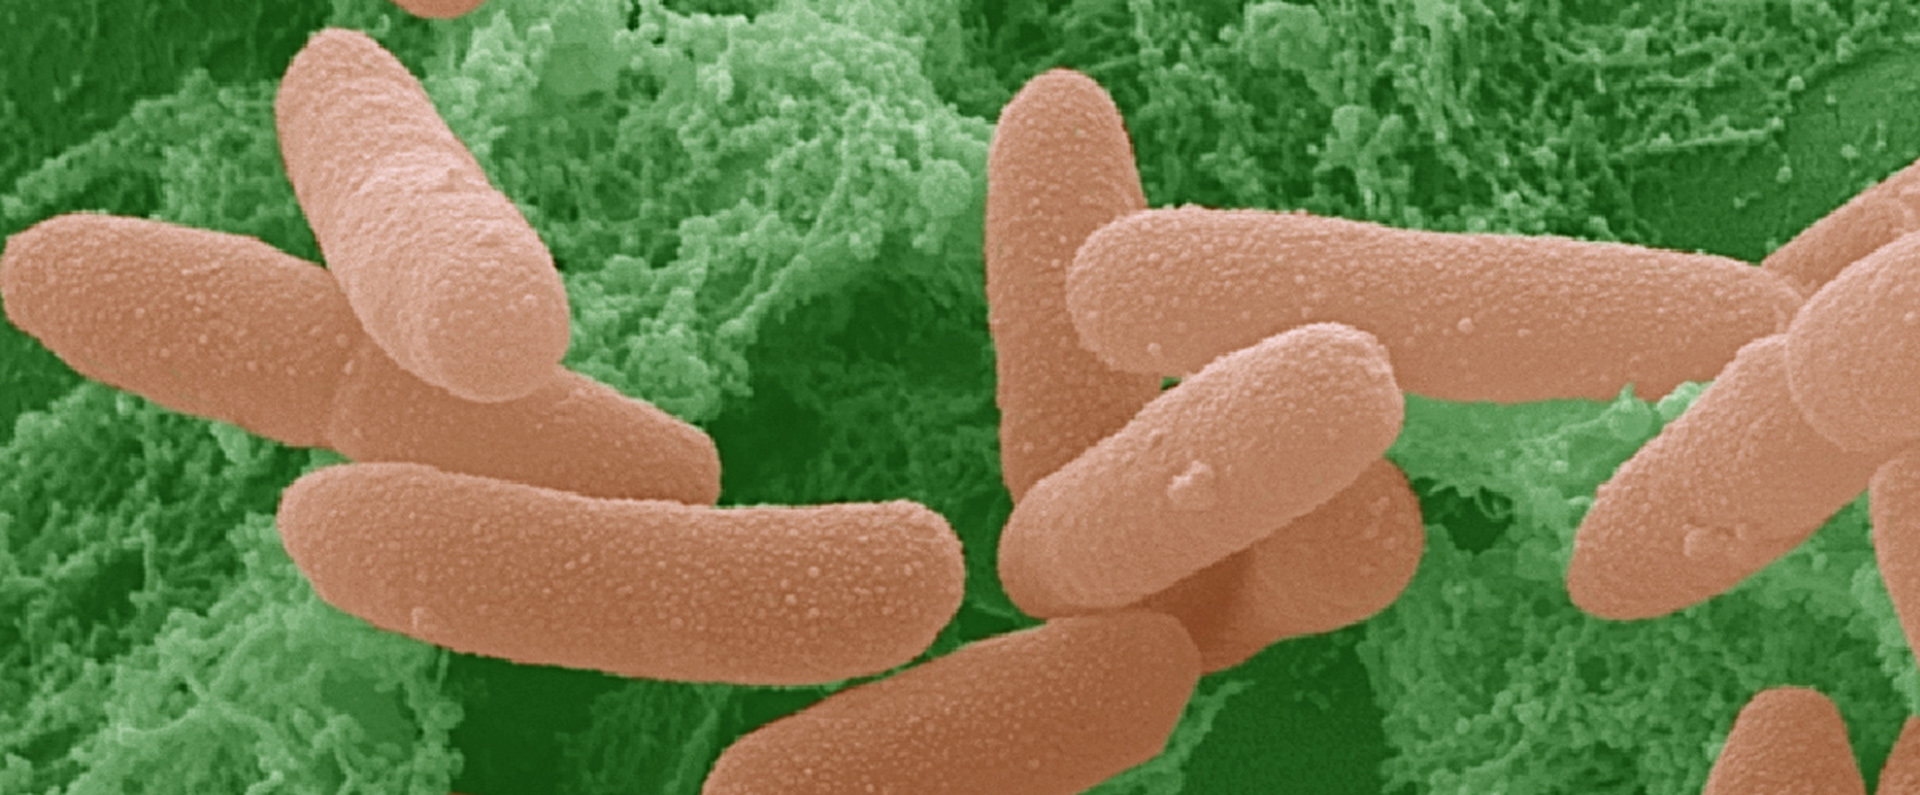 Scanning electron micrograph of E. coli on a lettuce leaf